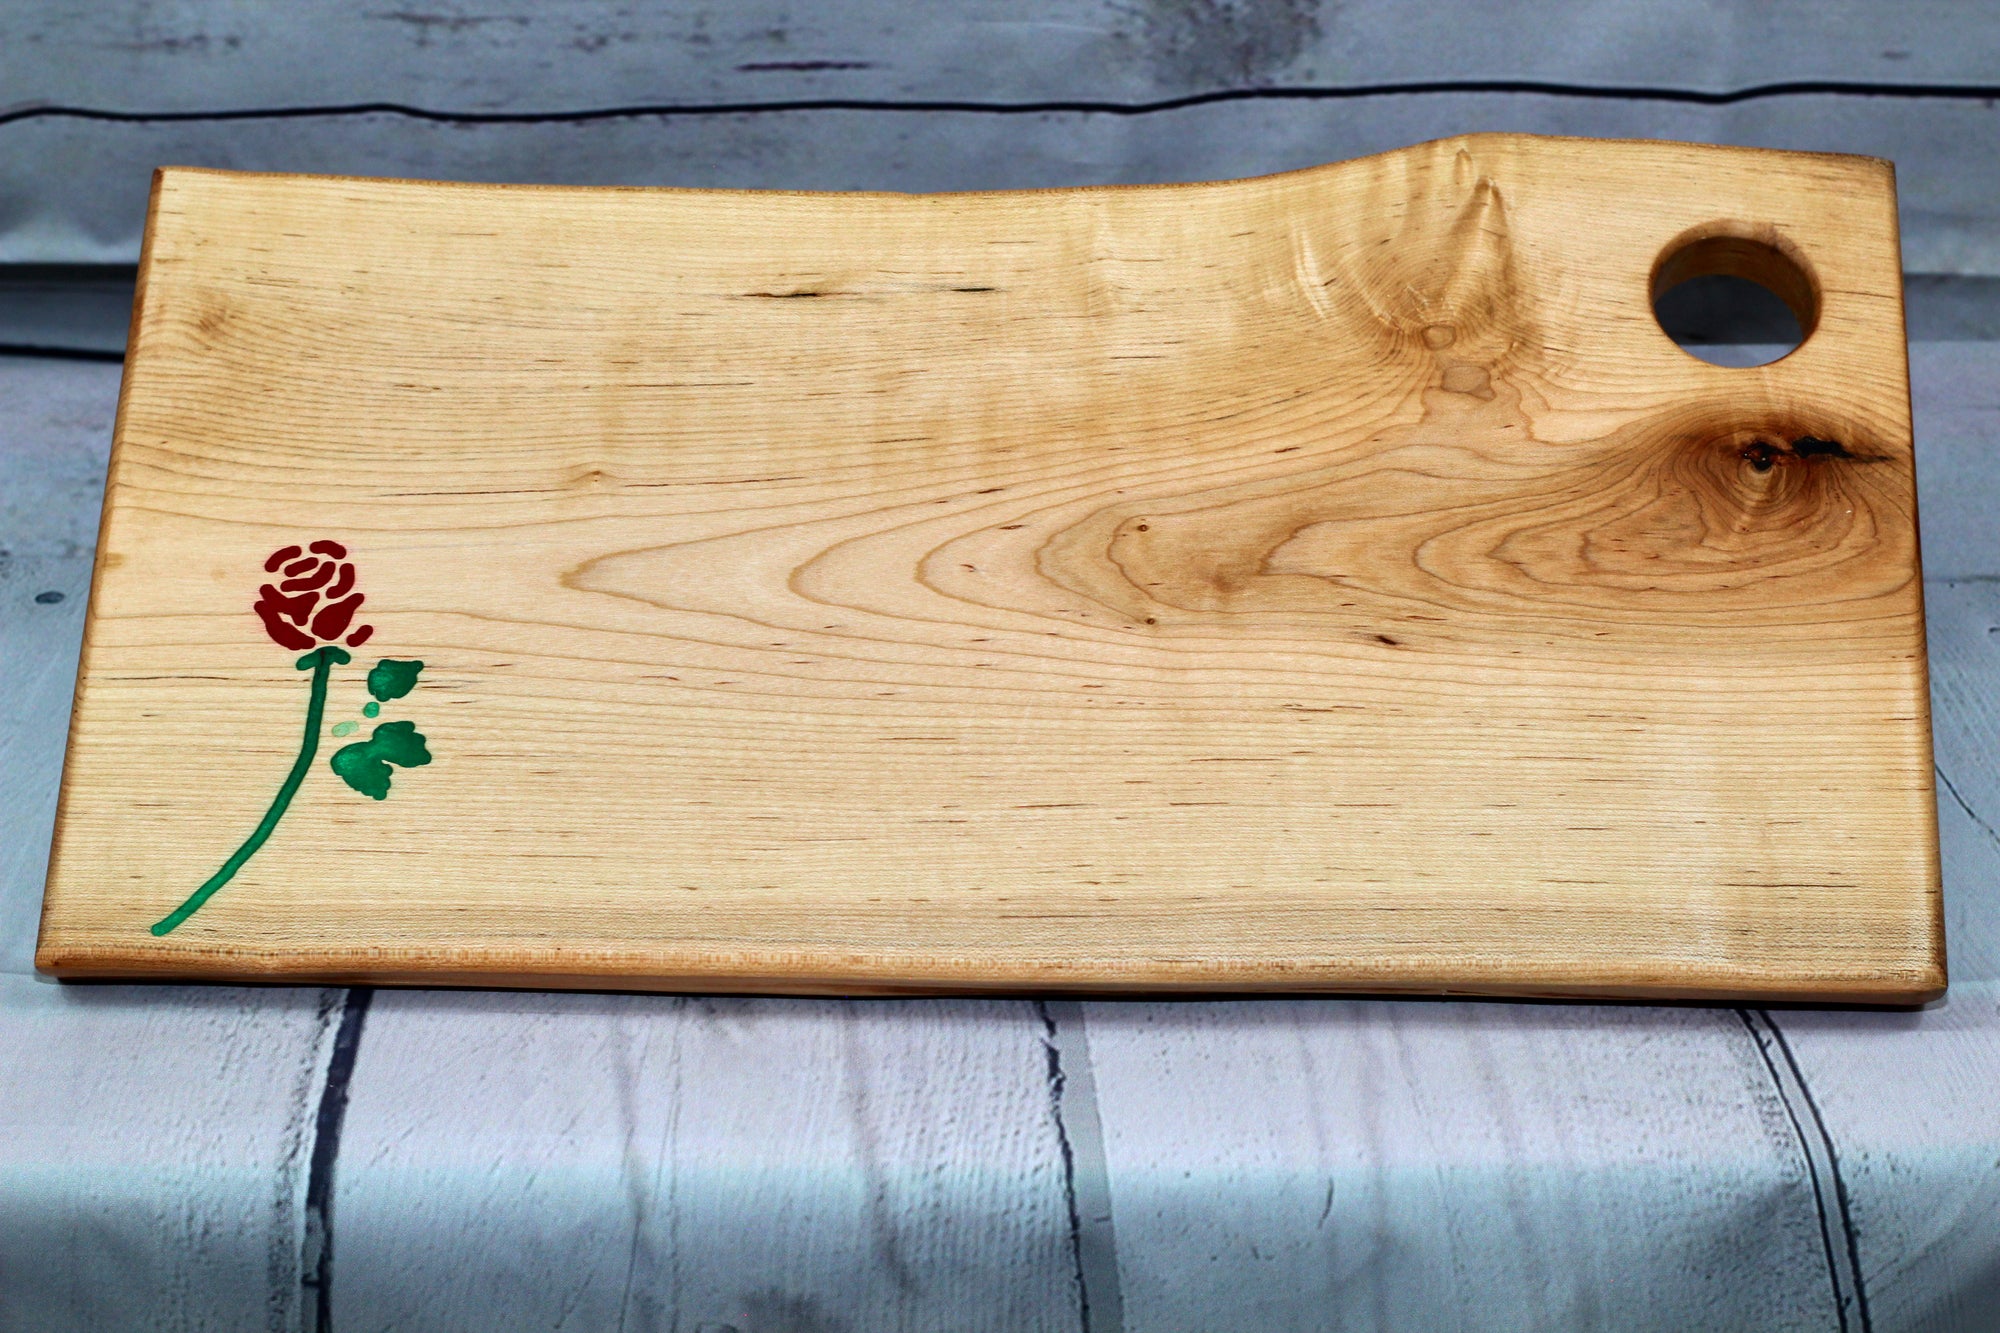 Charcuterie board (live edge maple with red and green epoxy rose)